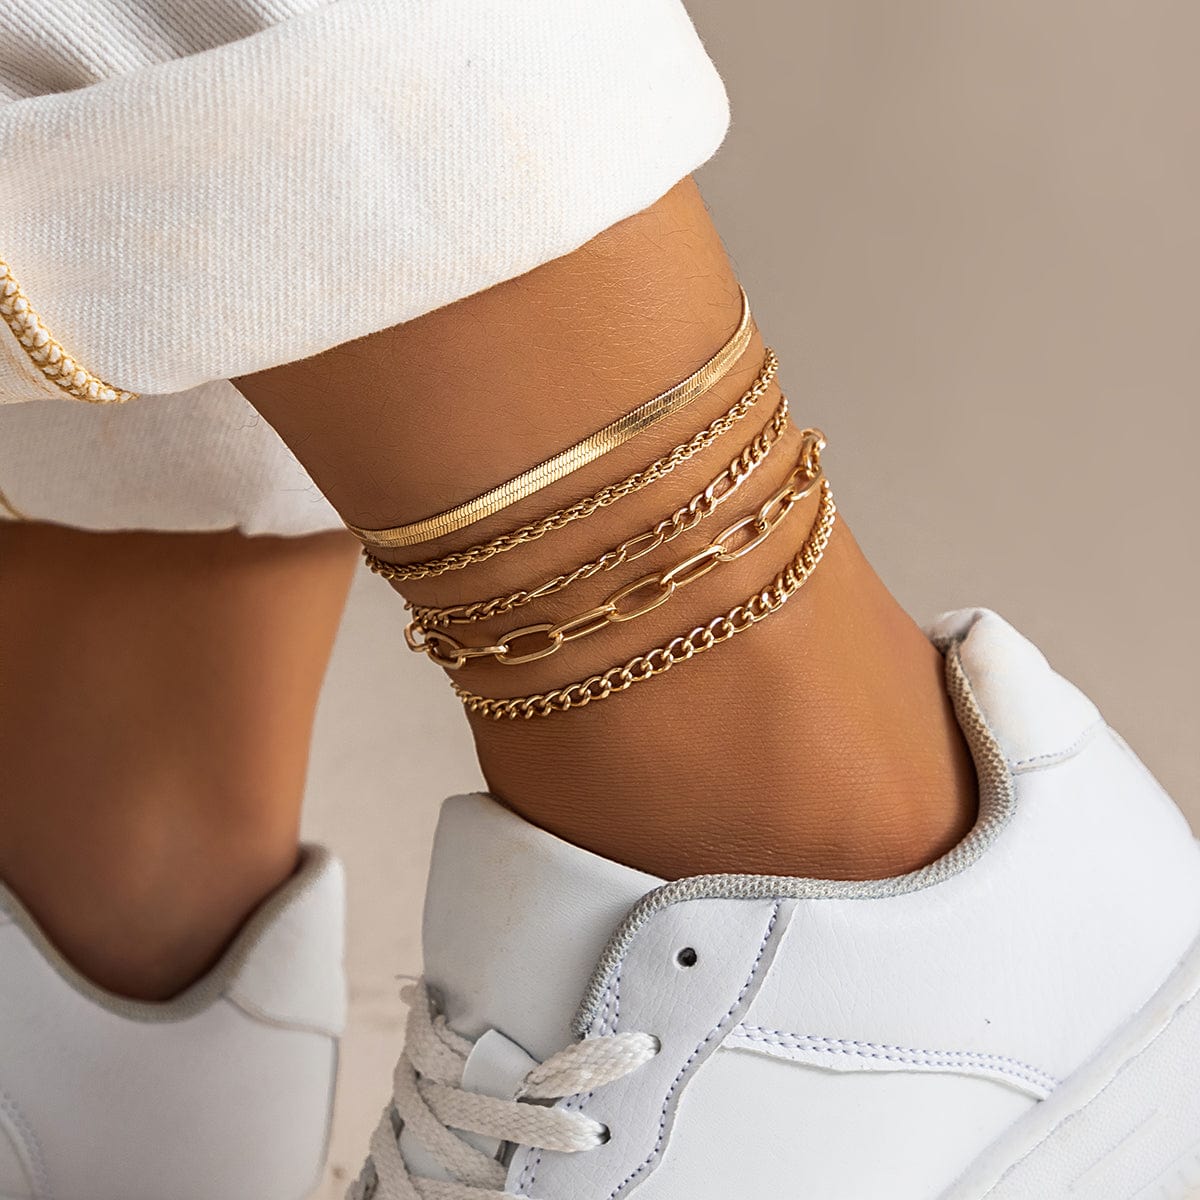 Boho Layered Gold Silver Plated Curb Chain Stackable Anklet Set - ArtGalleryZen